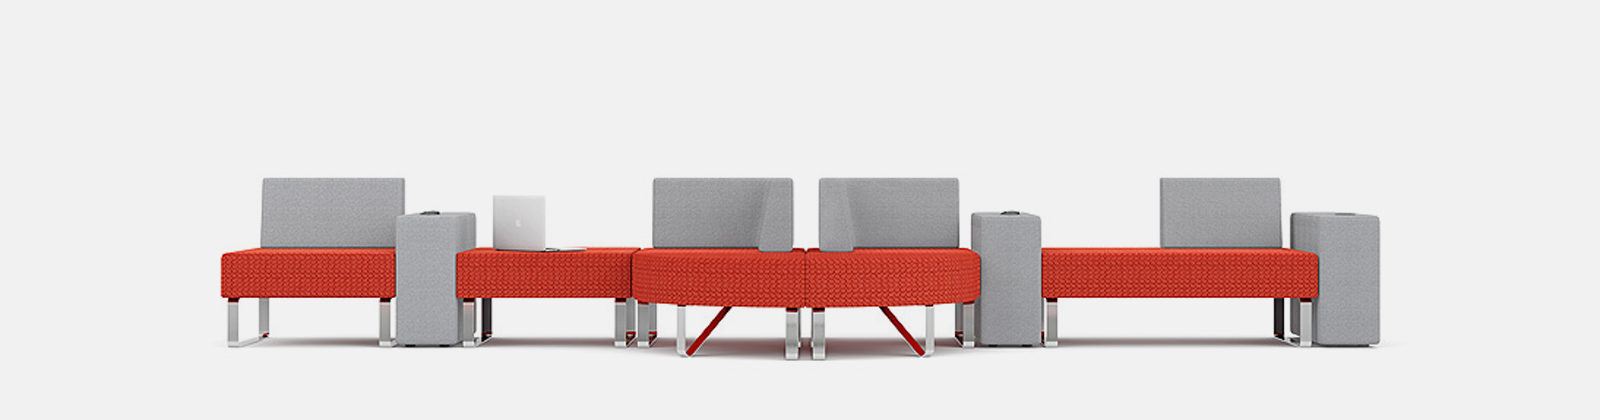 Intro modular seating in red and grey